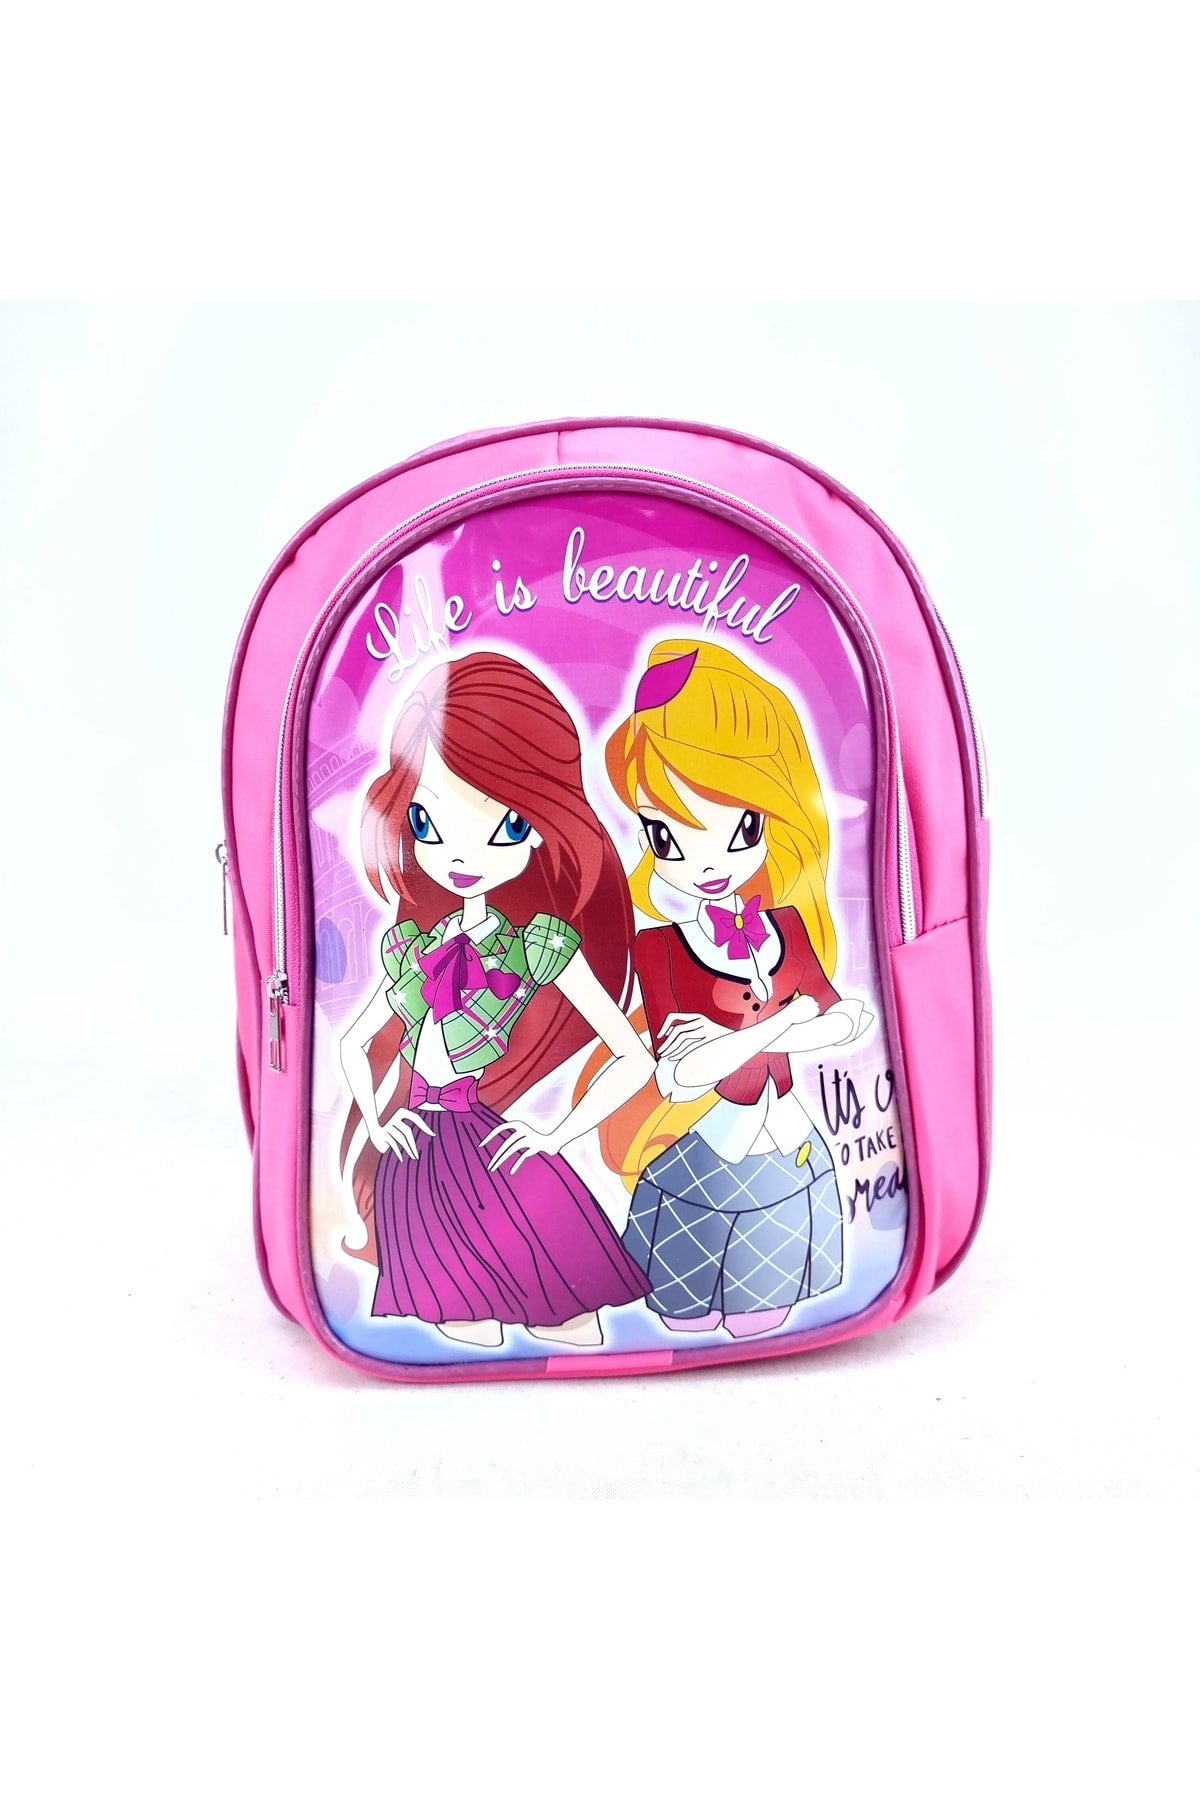 Primary School Kindergarten Student School Bag With Picture Lunch Box For Girls